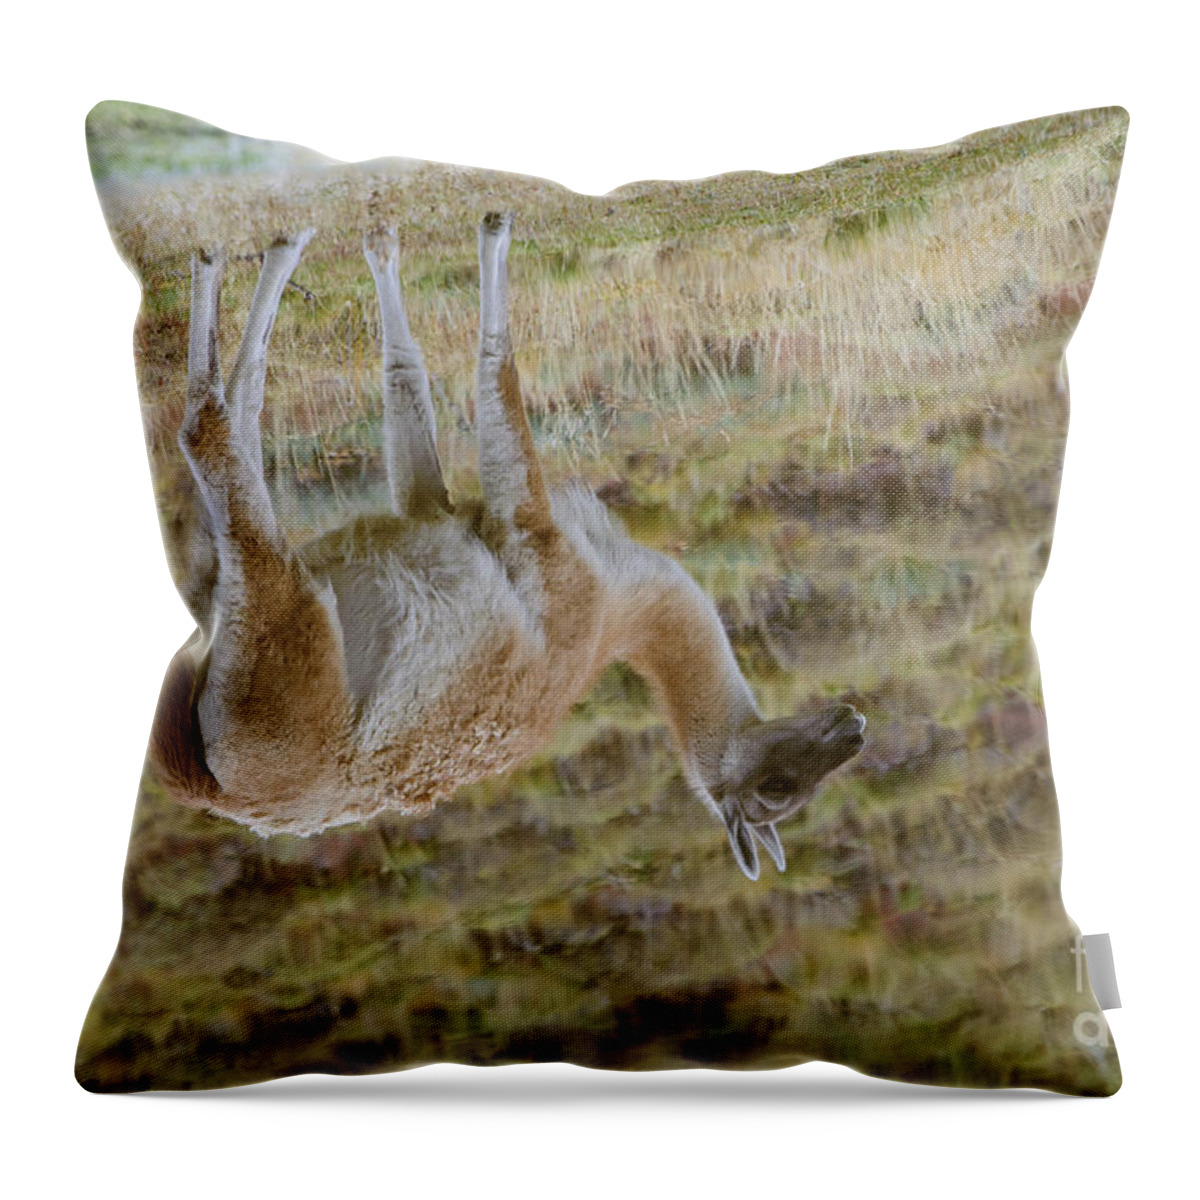 Chilean Fauna Throw Pillow featuring the photograph Guanacos In Chilean National Park #5 by John Shaw